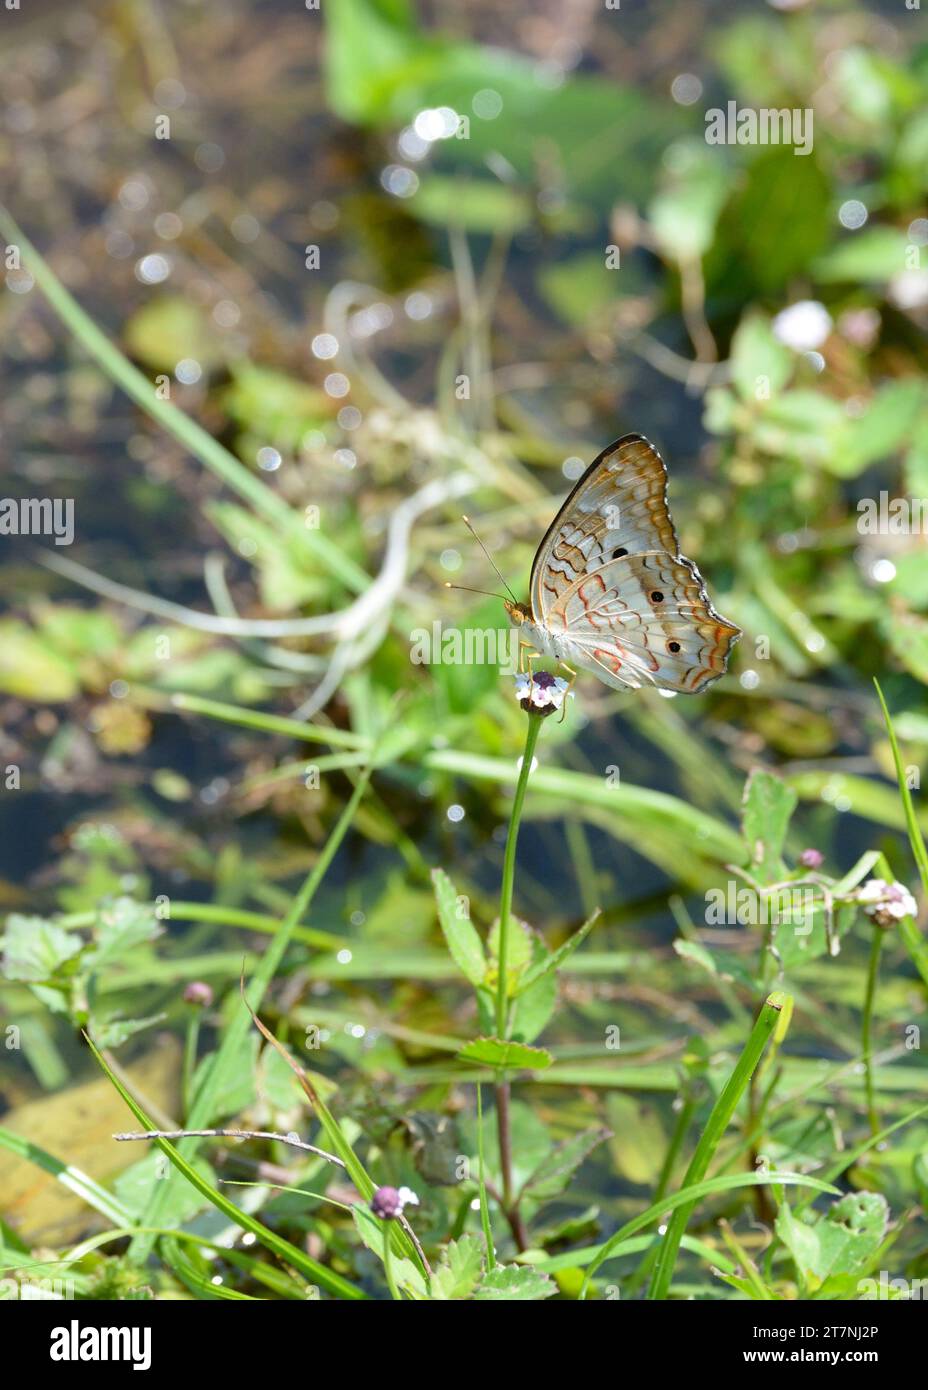 Anartia jatrophae, the White Peacock butterfly of south east United States, Central America and throughout much of South America. Stock Photo